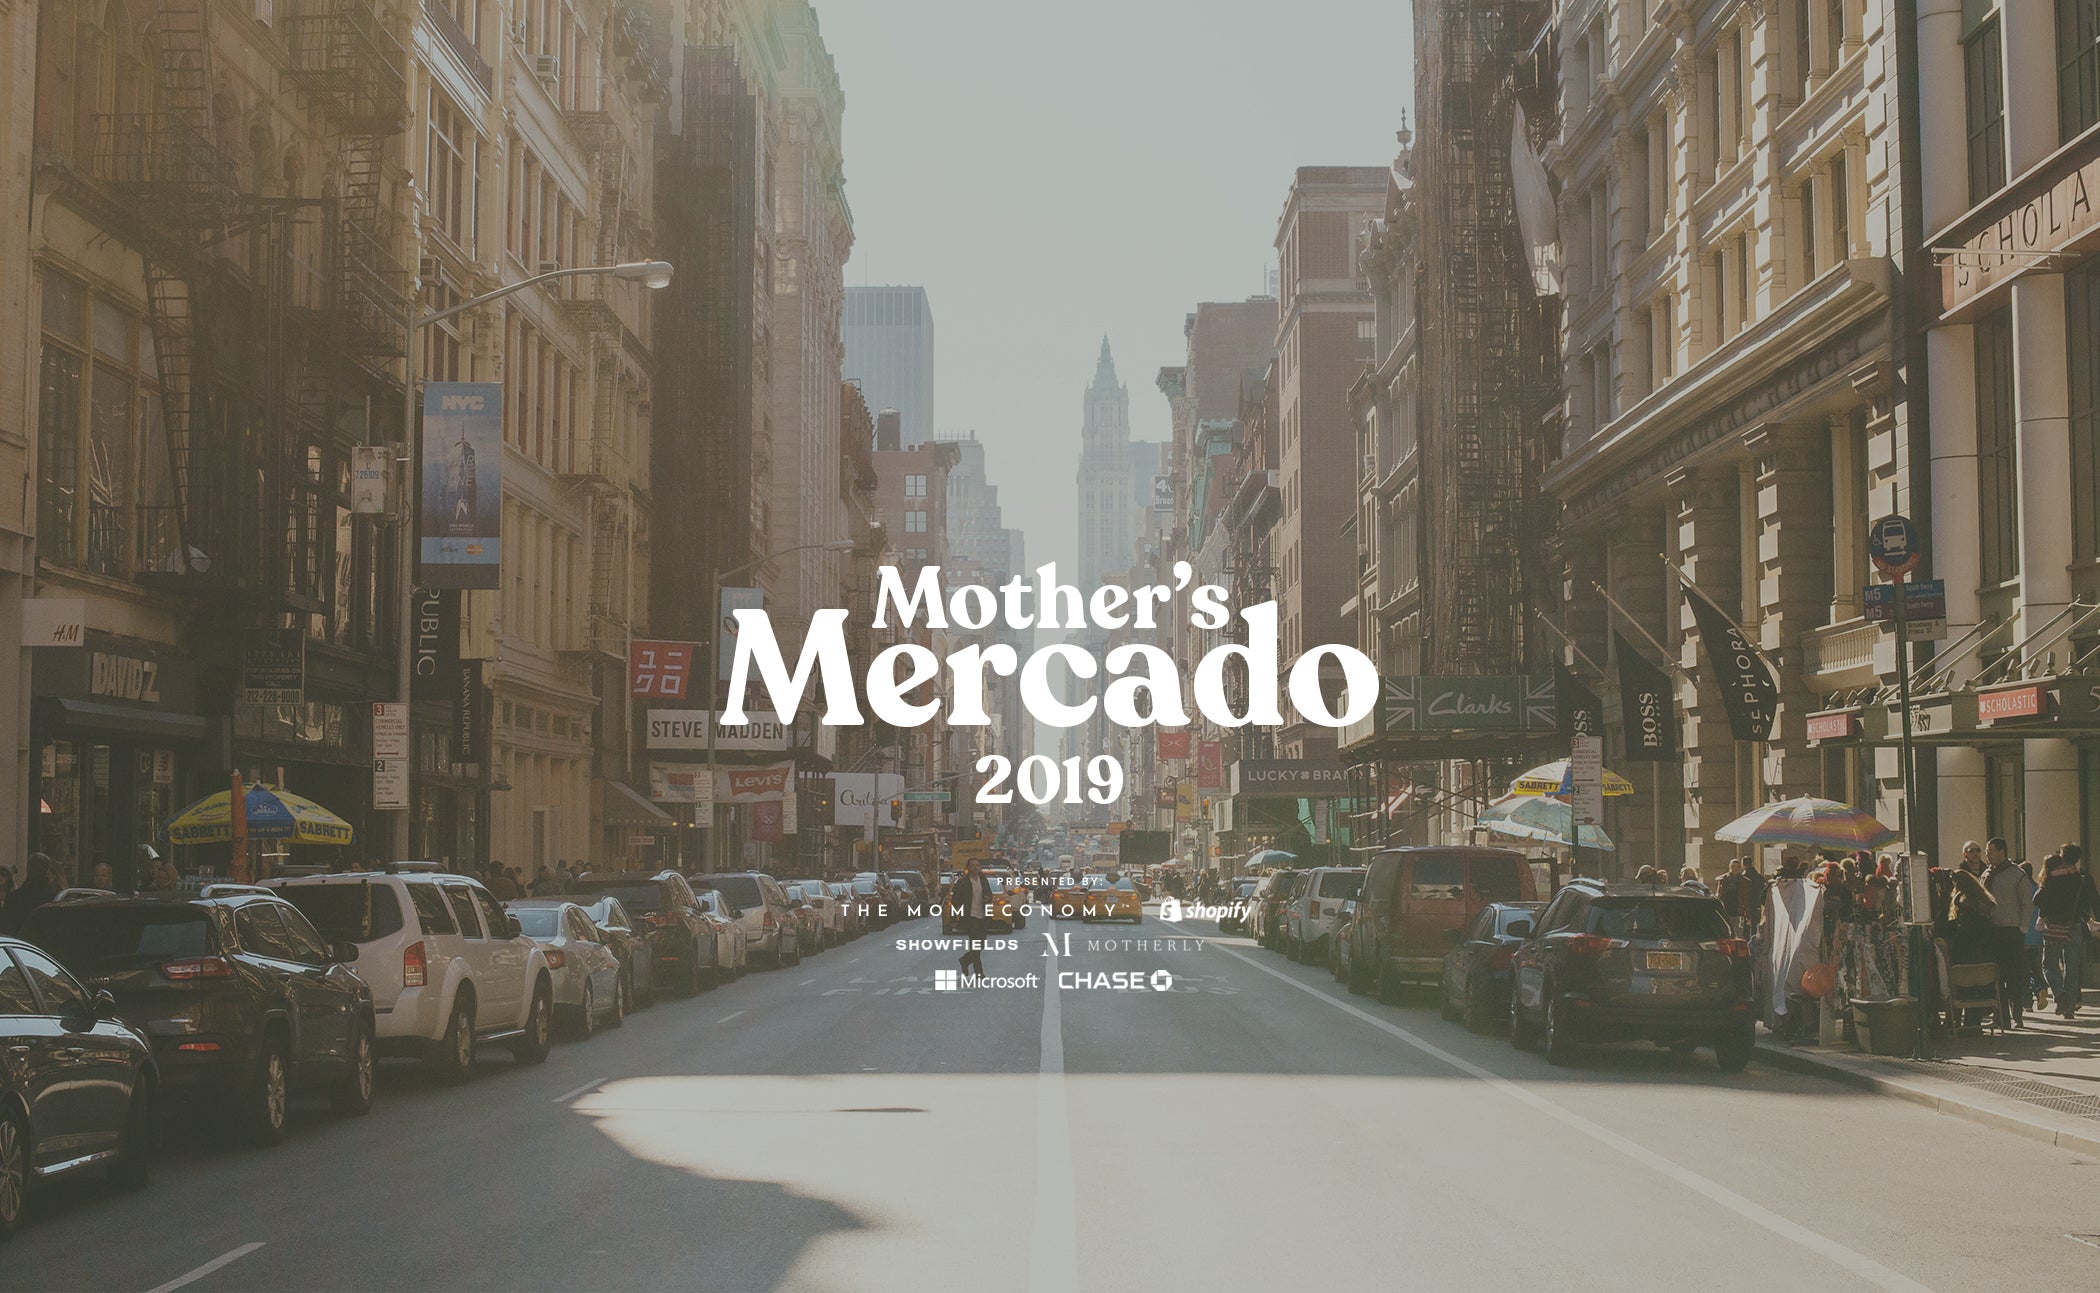 Welcome to Mother's Mercado 2019